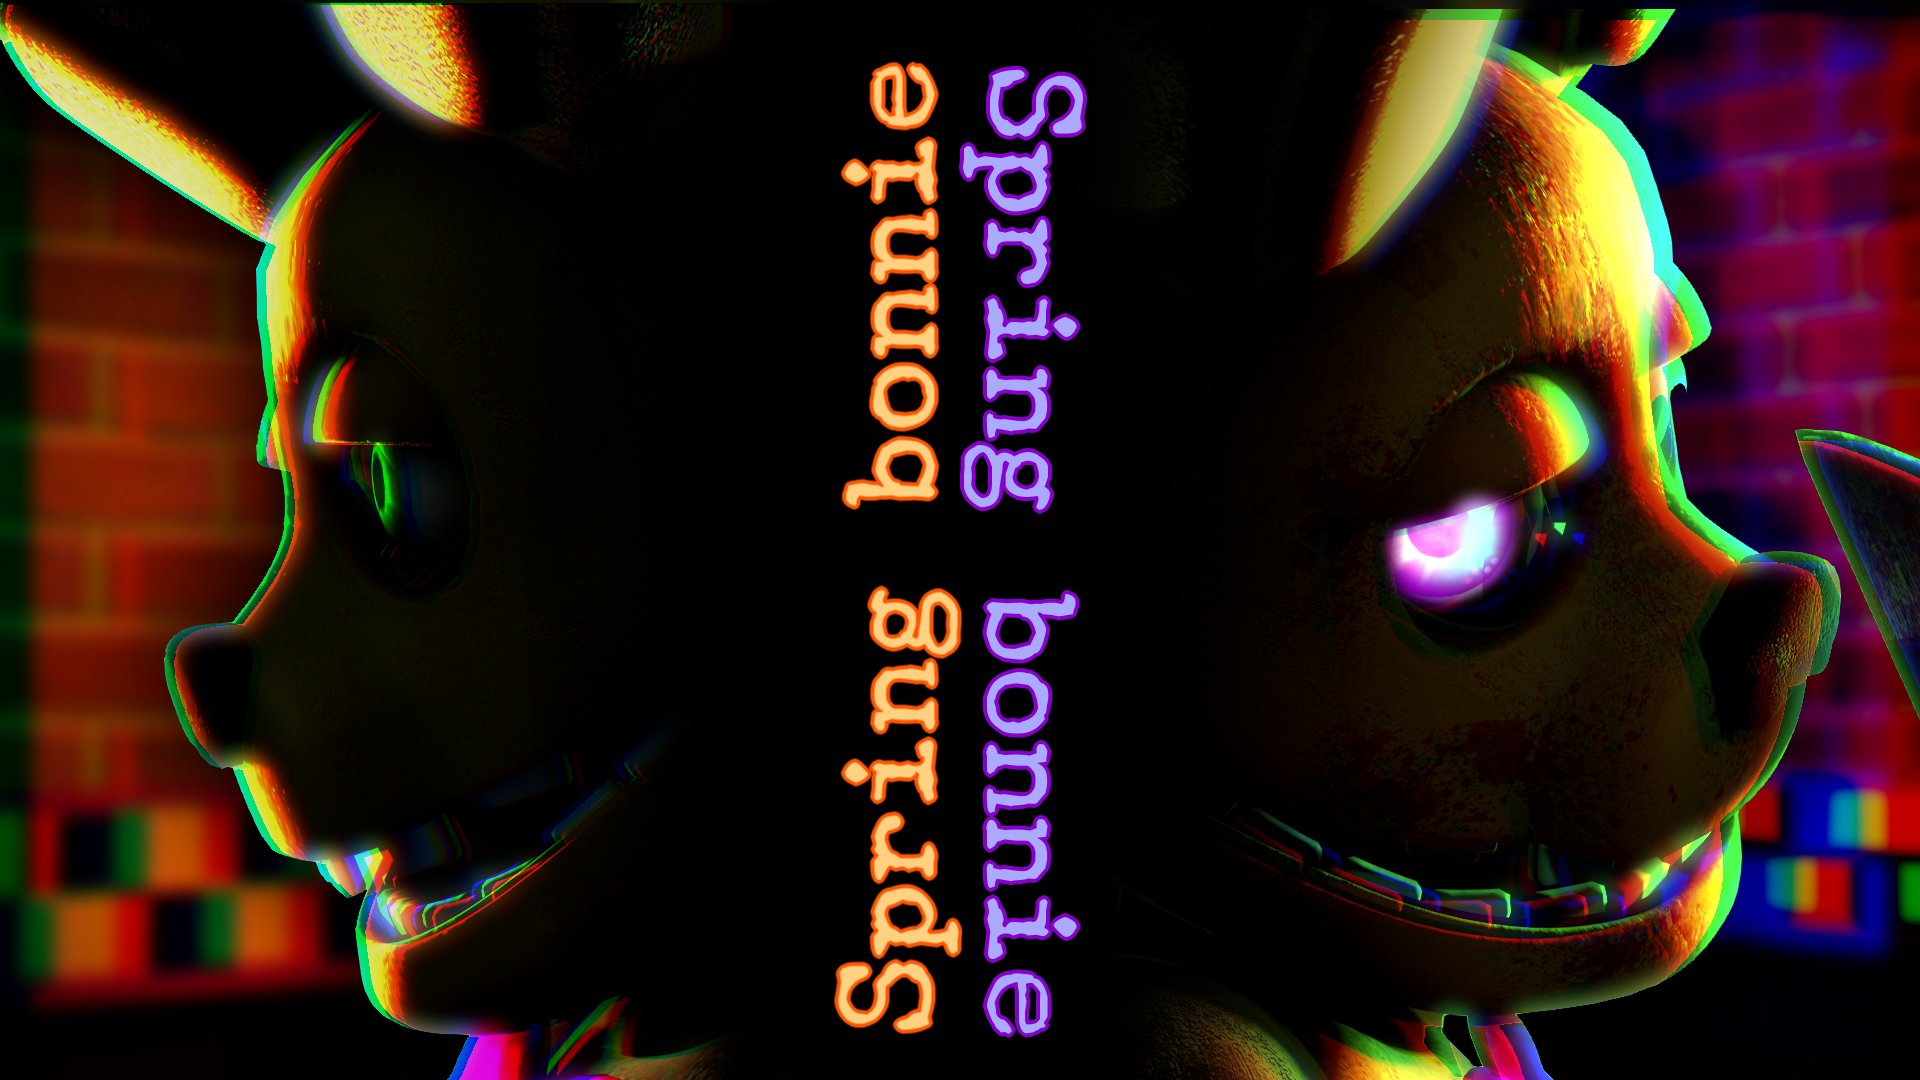 Into the pit Spring Bonnie 02  Five Nights at Freddys 2016  Facebook